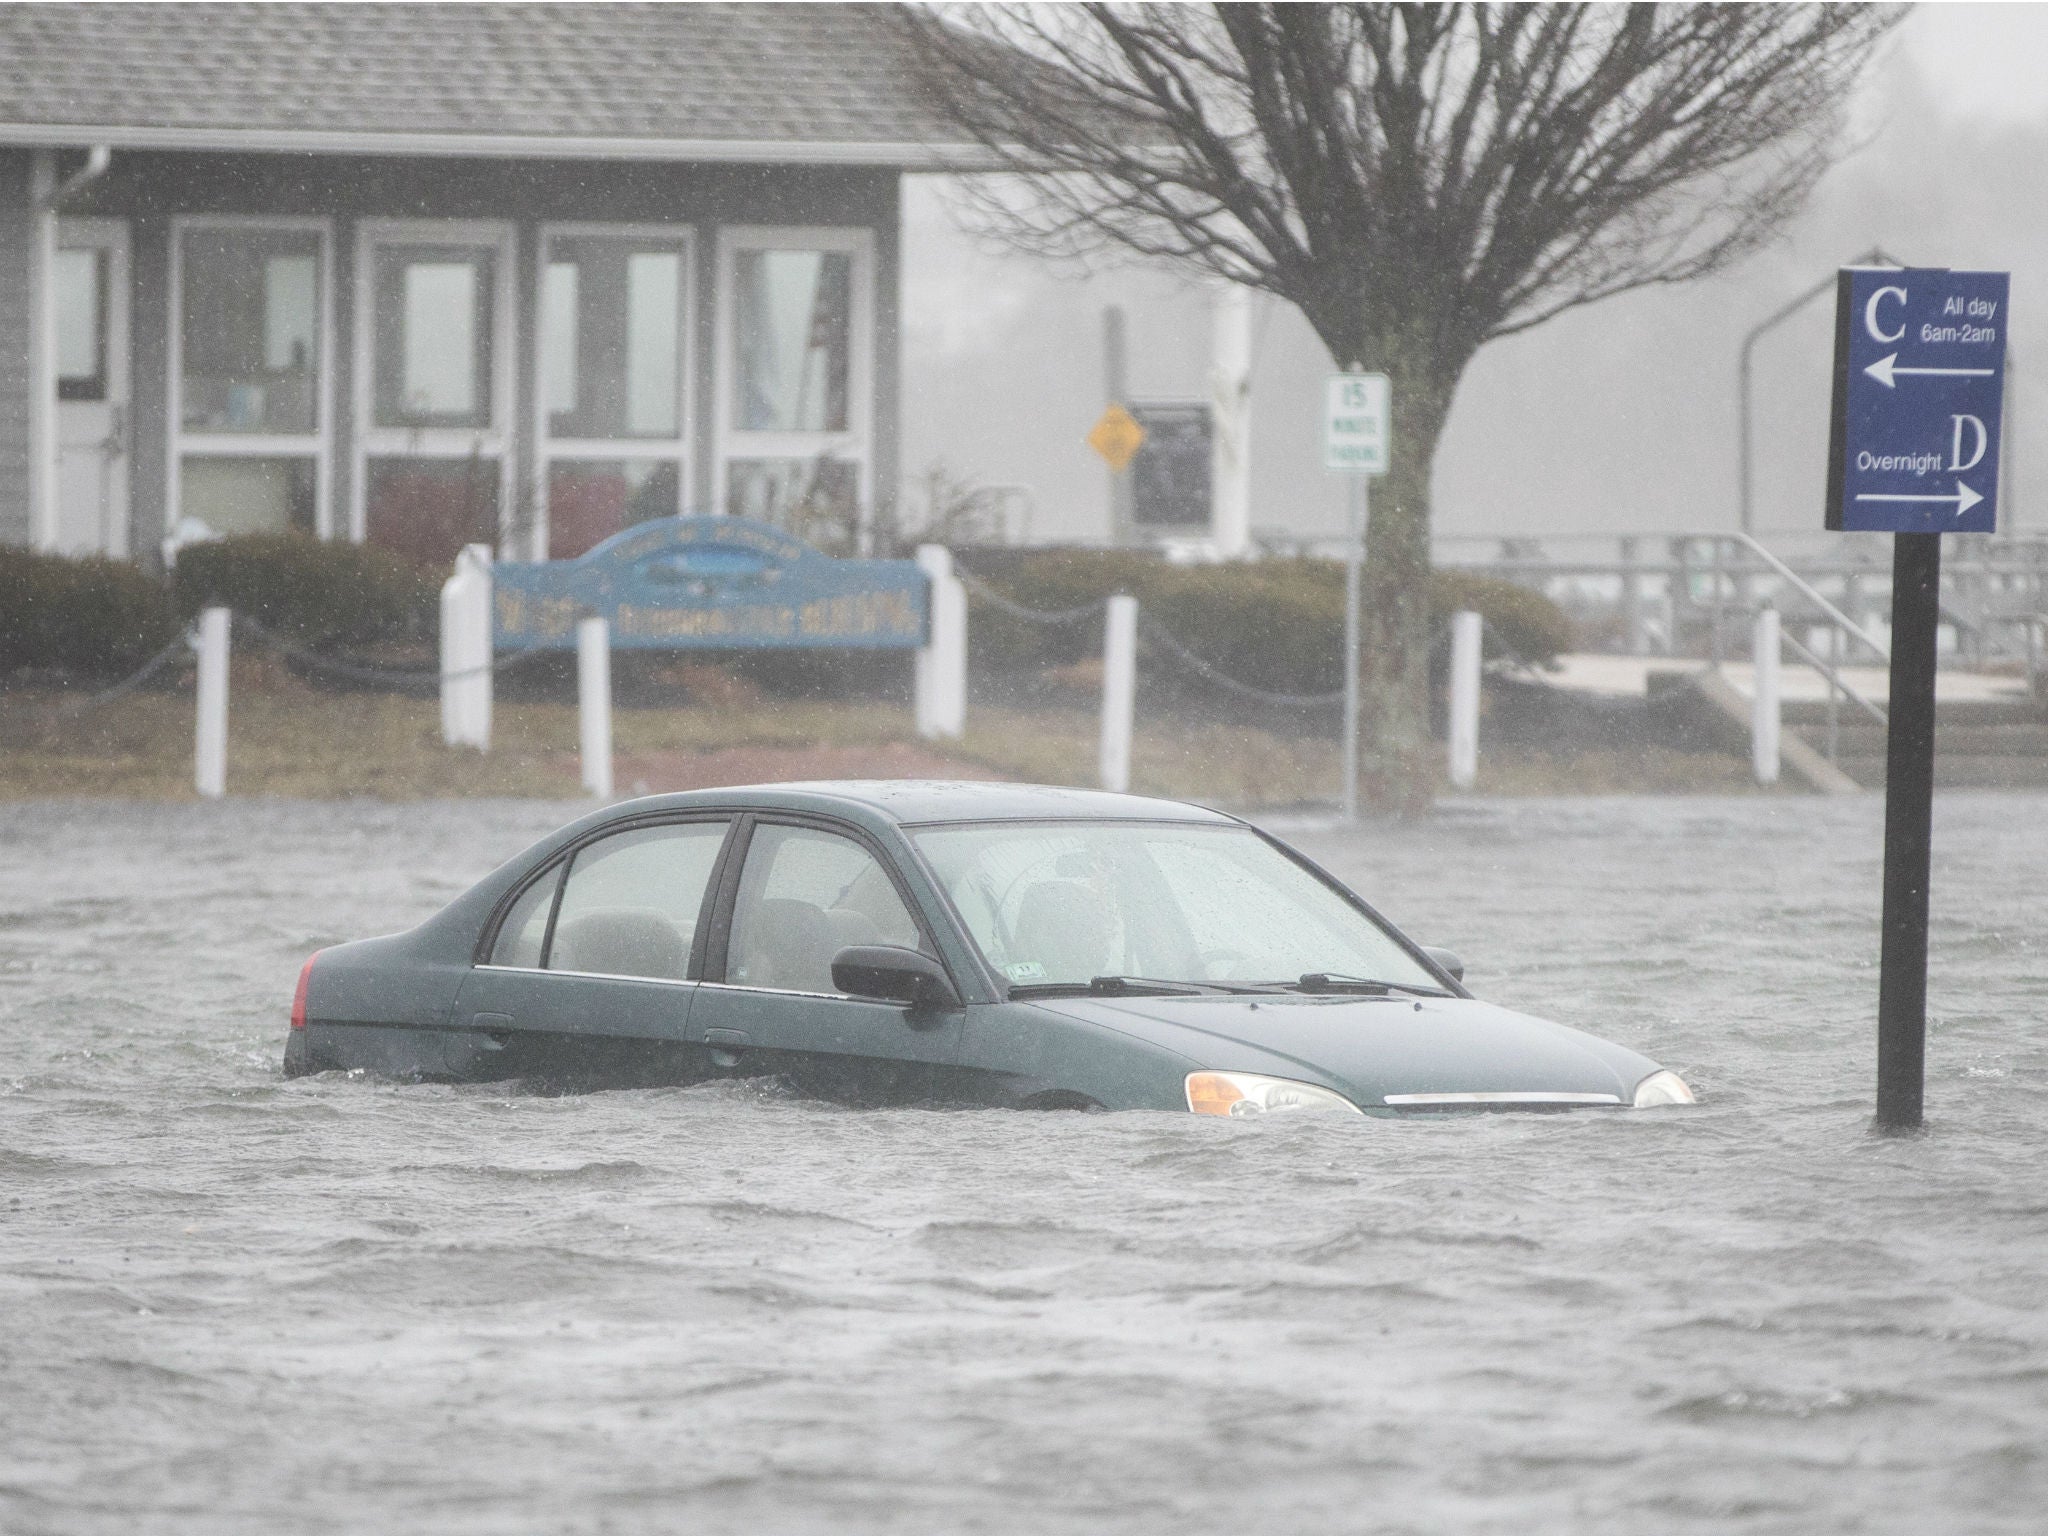 A car is submerged as the coastal storm hits Scituate, Massachusetts